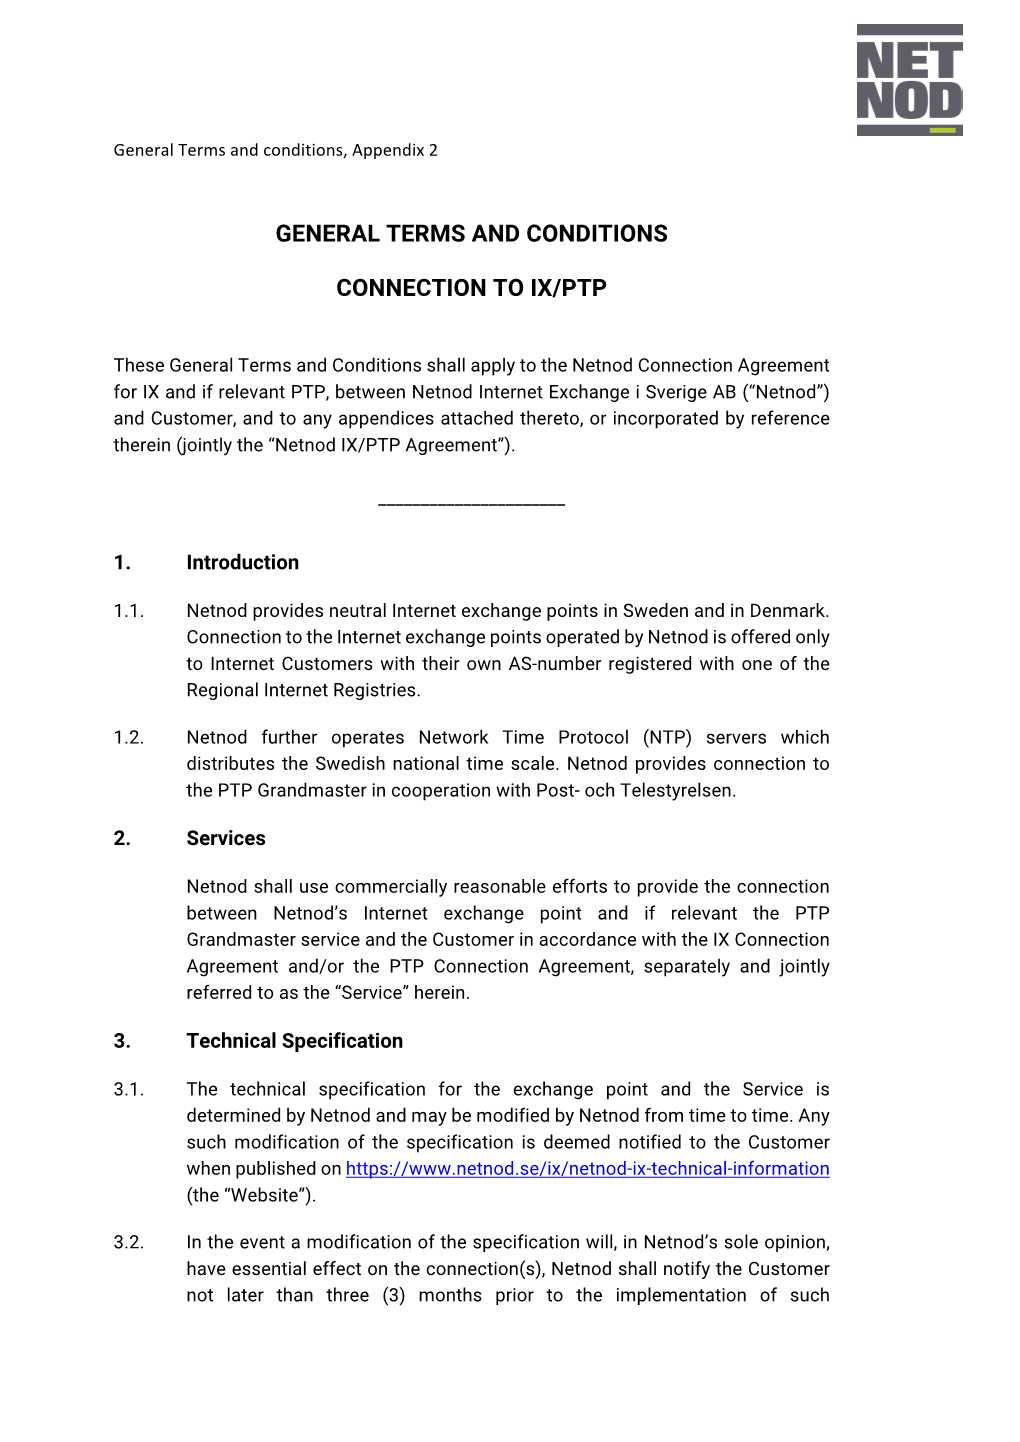 General Terms and Conditions, Appendix 2